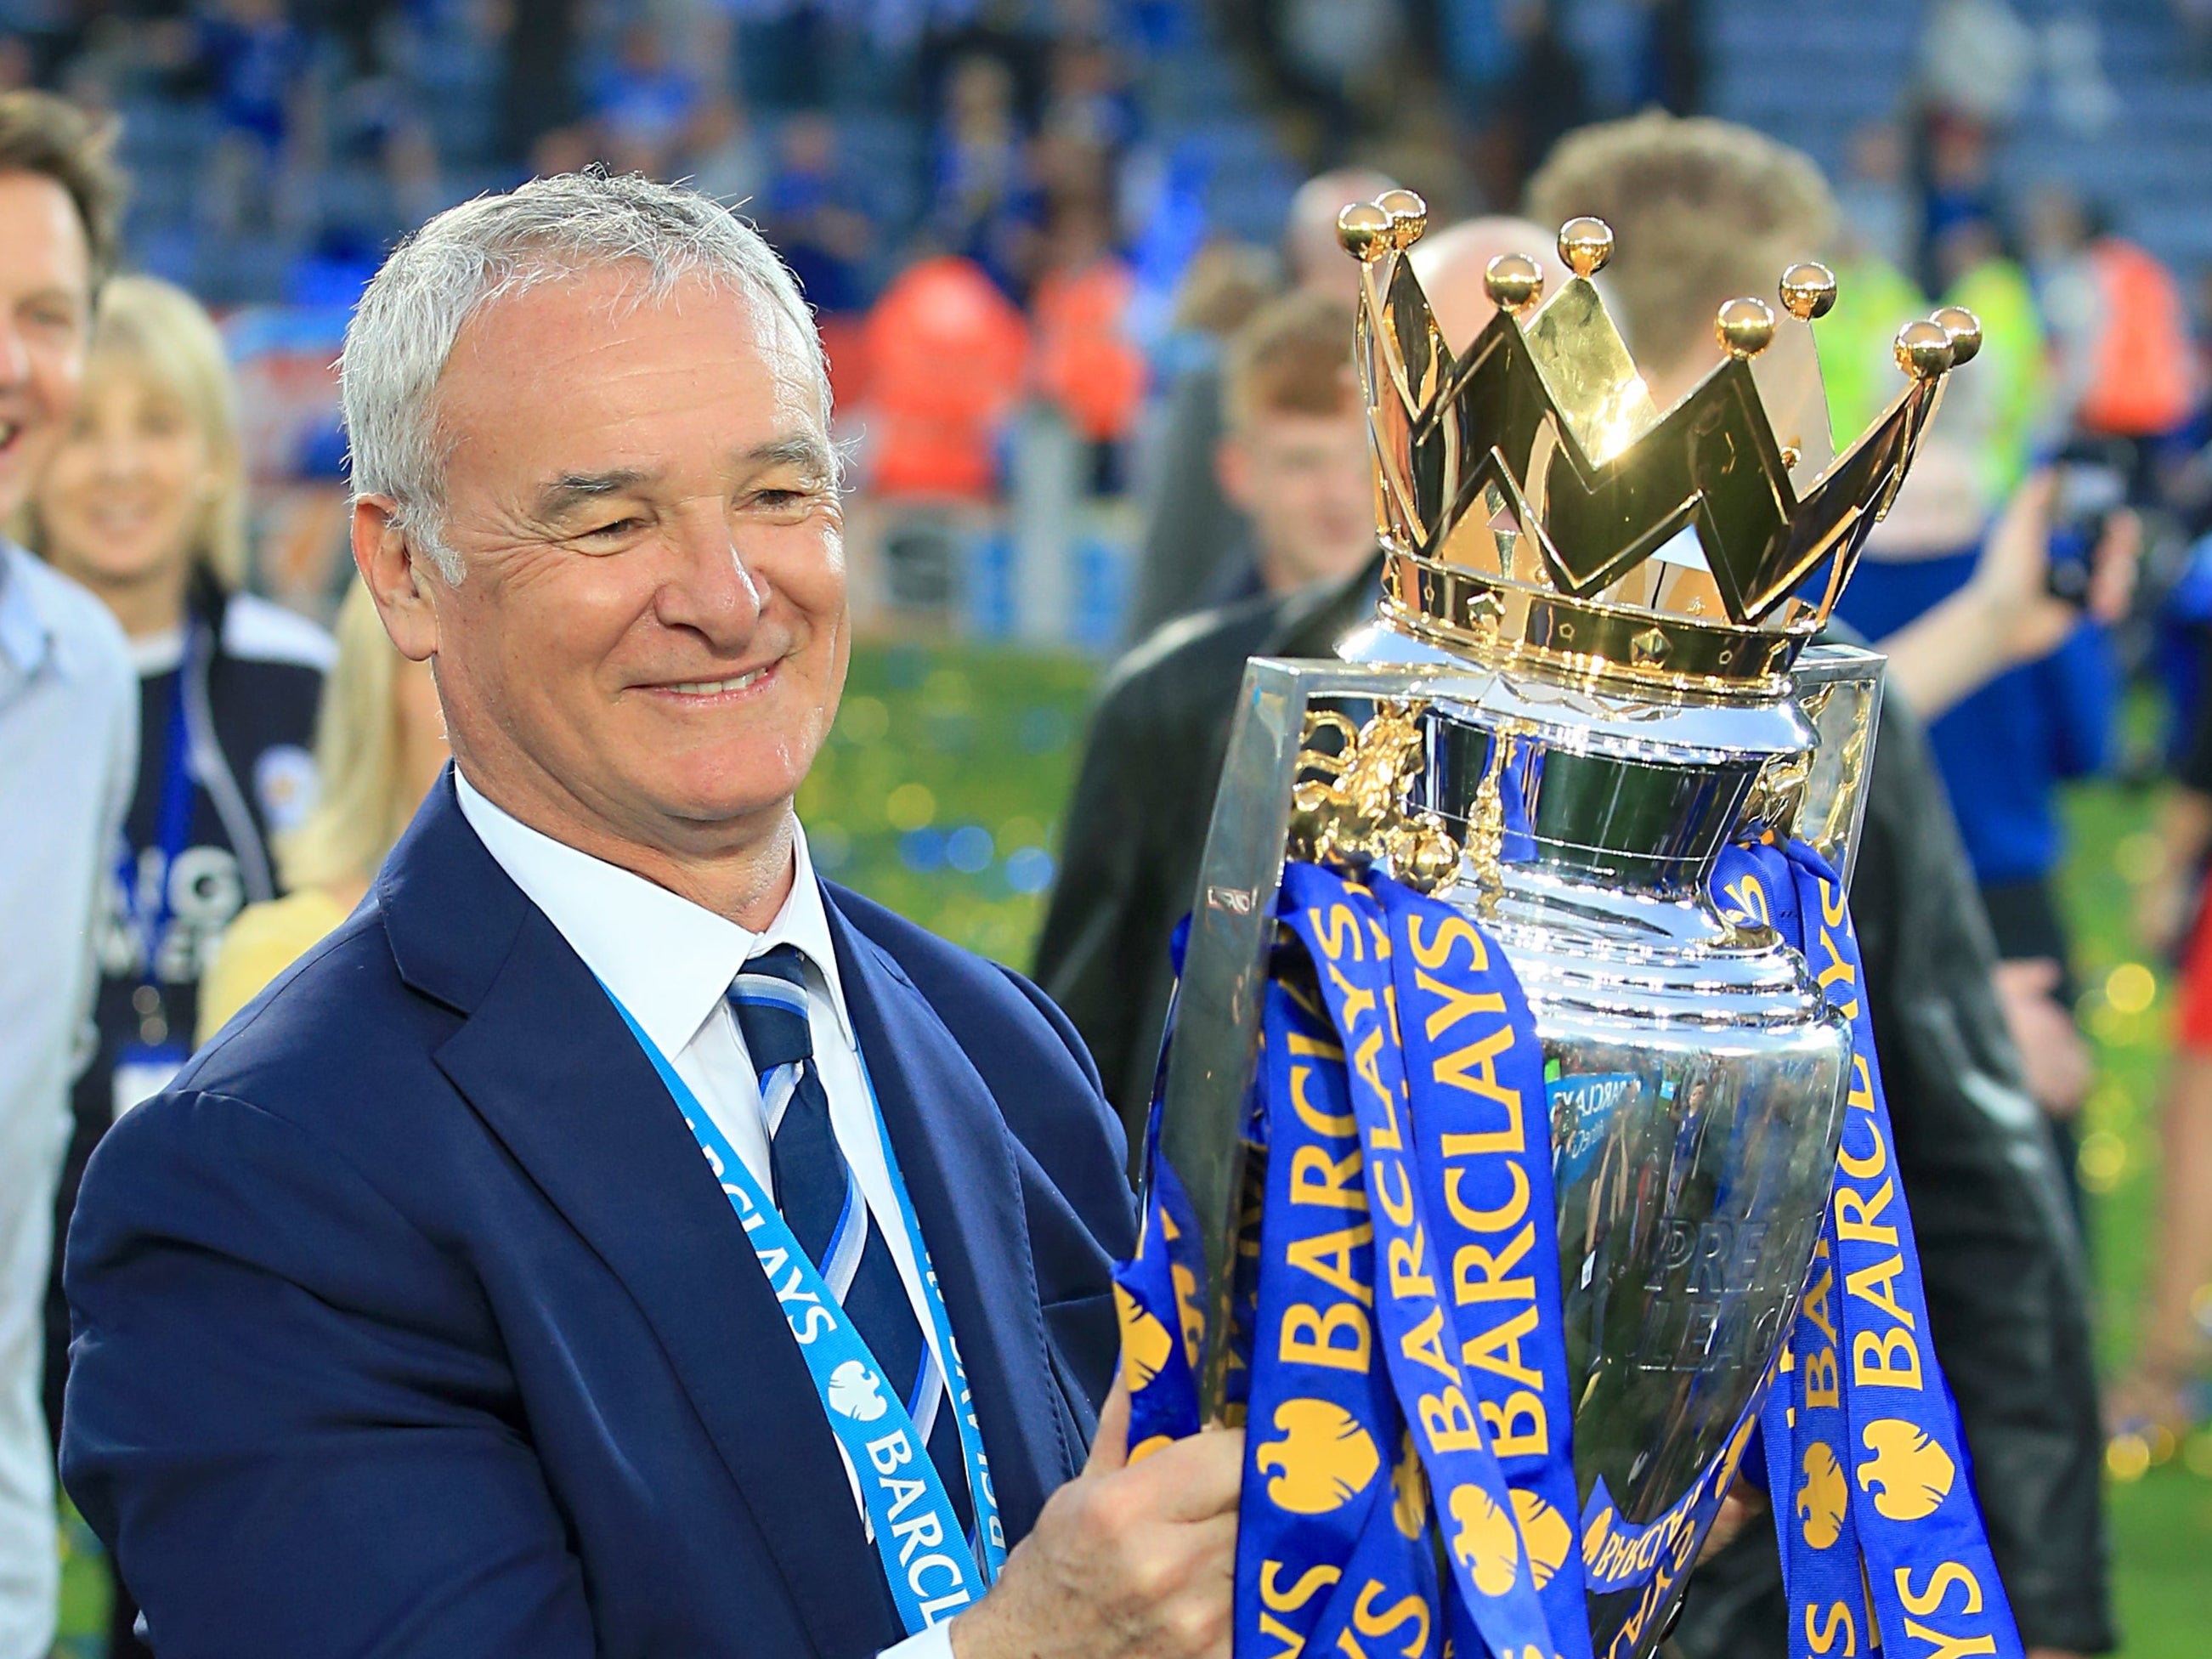 Ranieri won the title with the Foxes